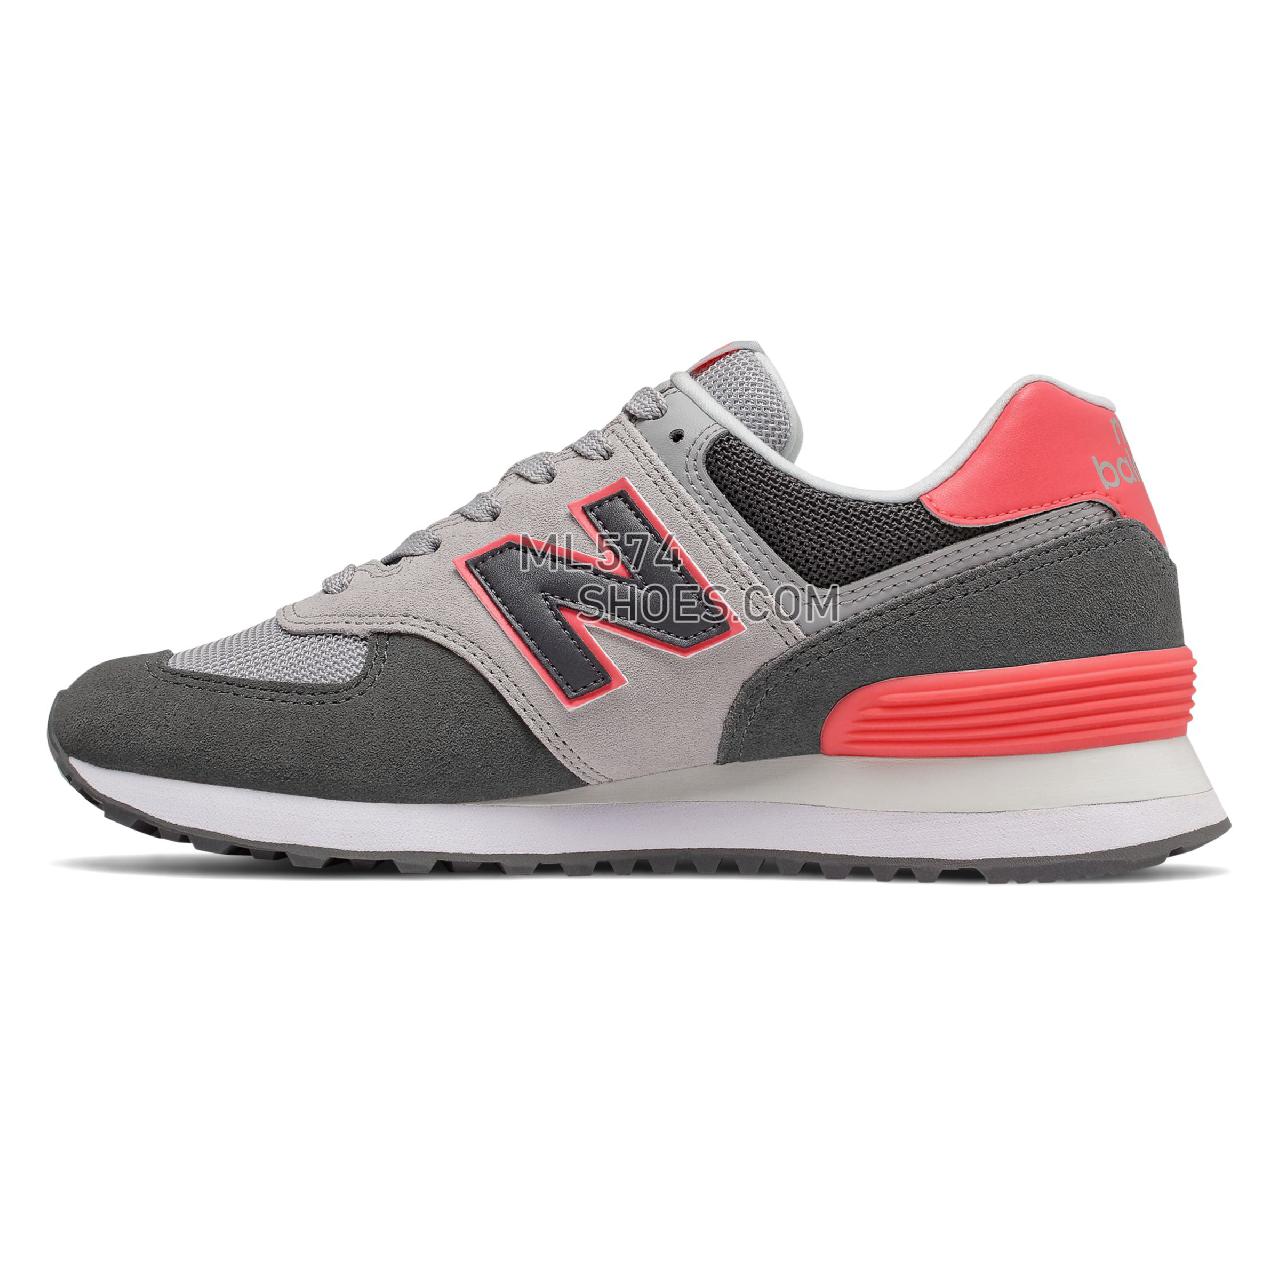 New Balance 574 - Women's Whats Trending - Black with Tahitian Pink and Grey - WL574SOP